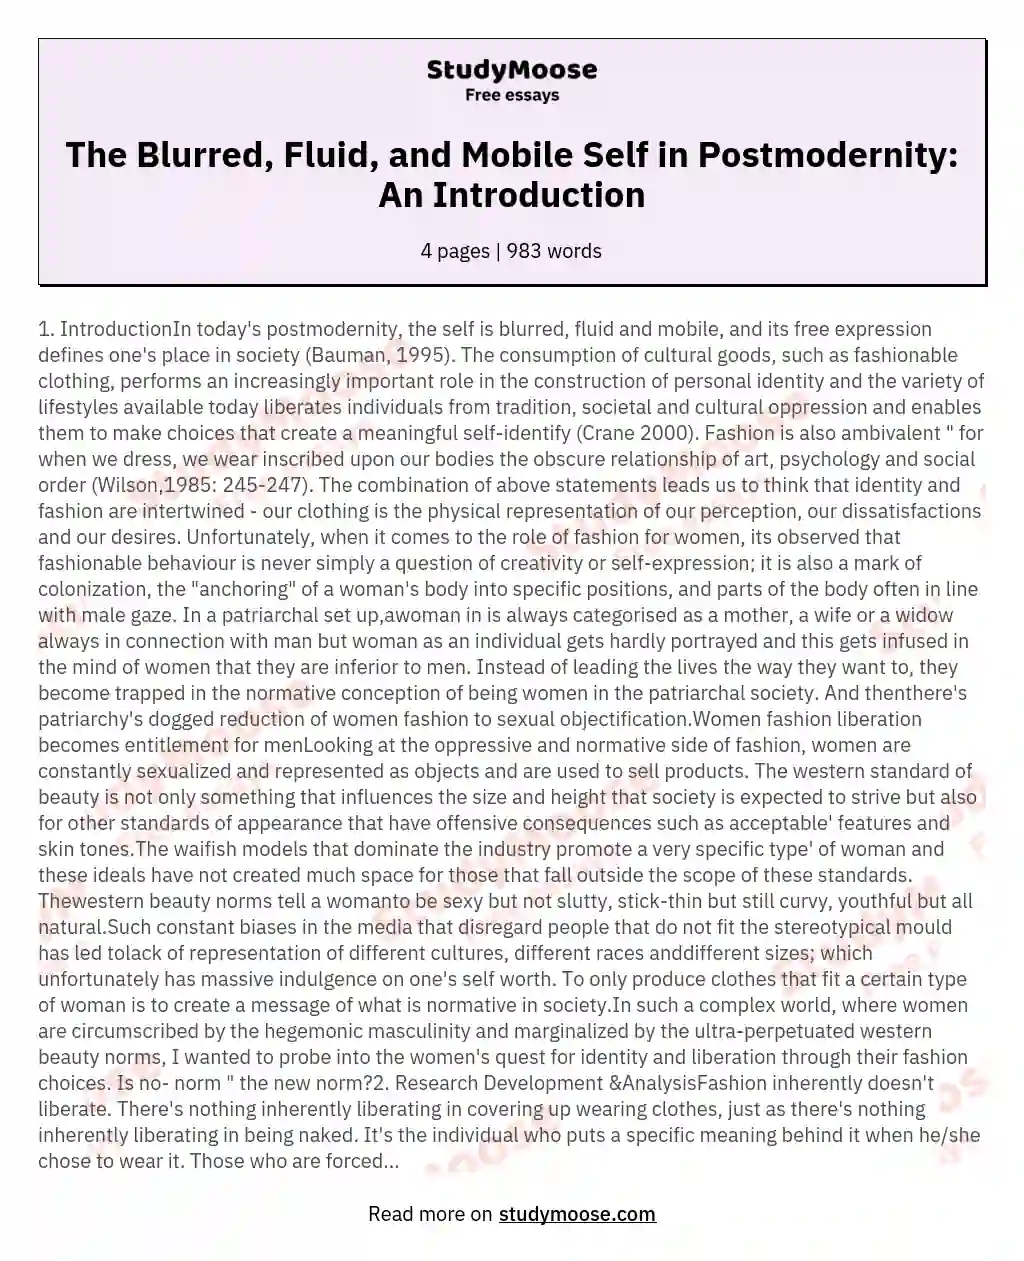 IntroductionIn today's postmodernity the self is blurred fluid and mobile and its